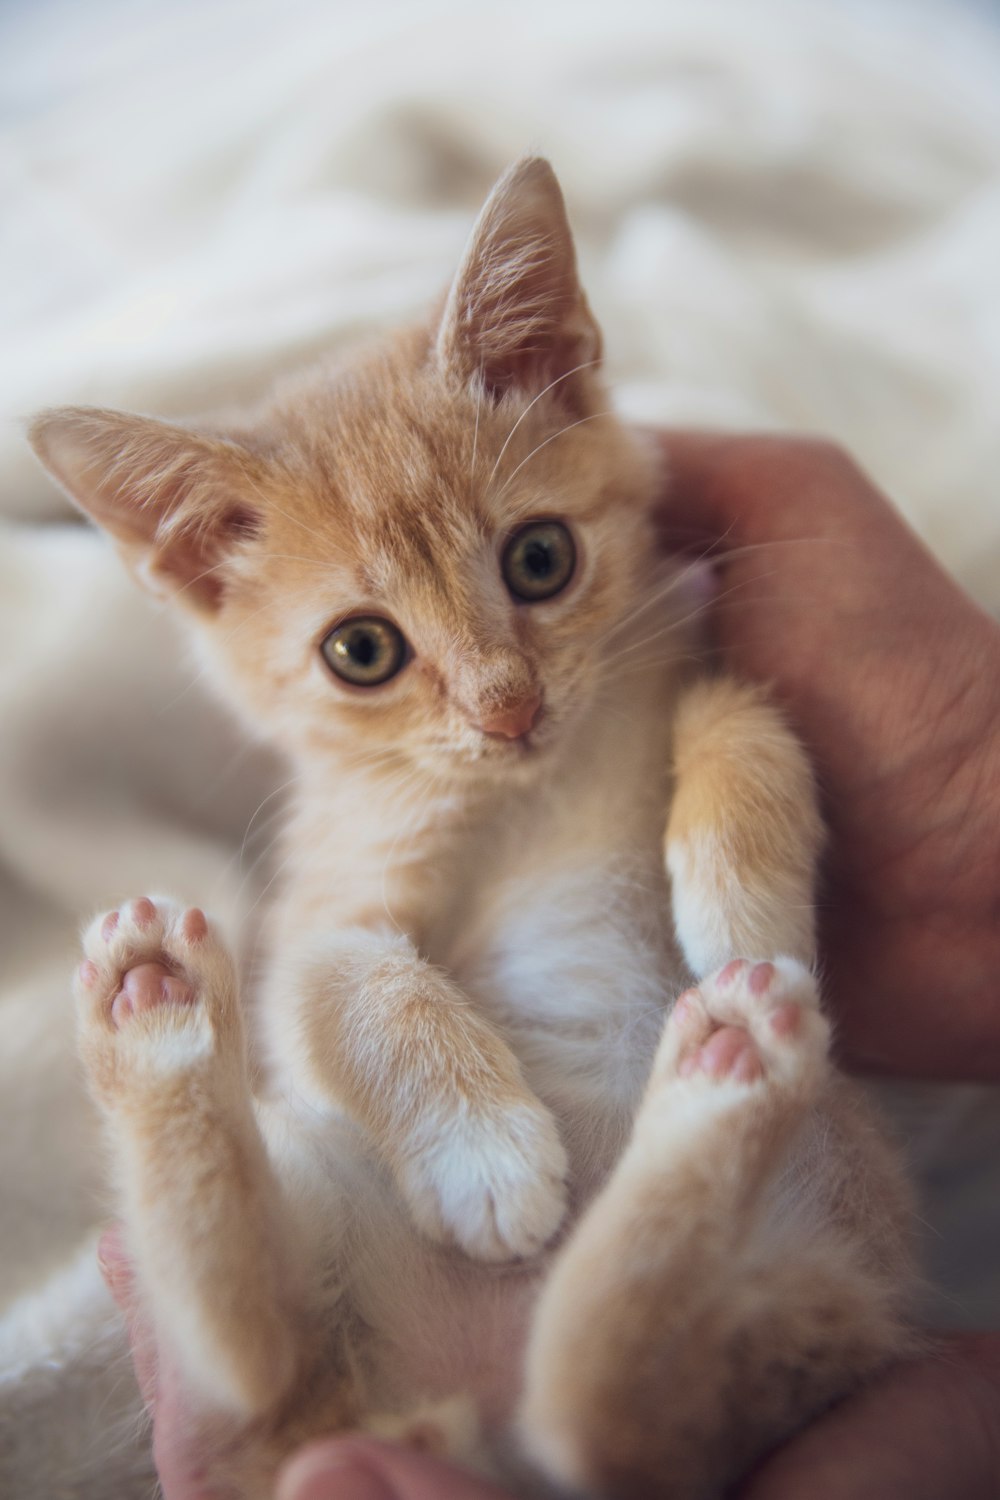 a person holding a small kitten in their hands